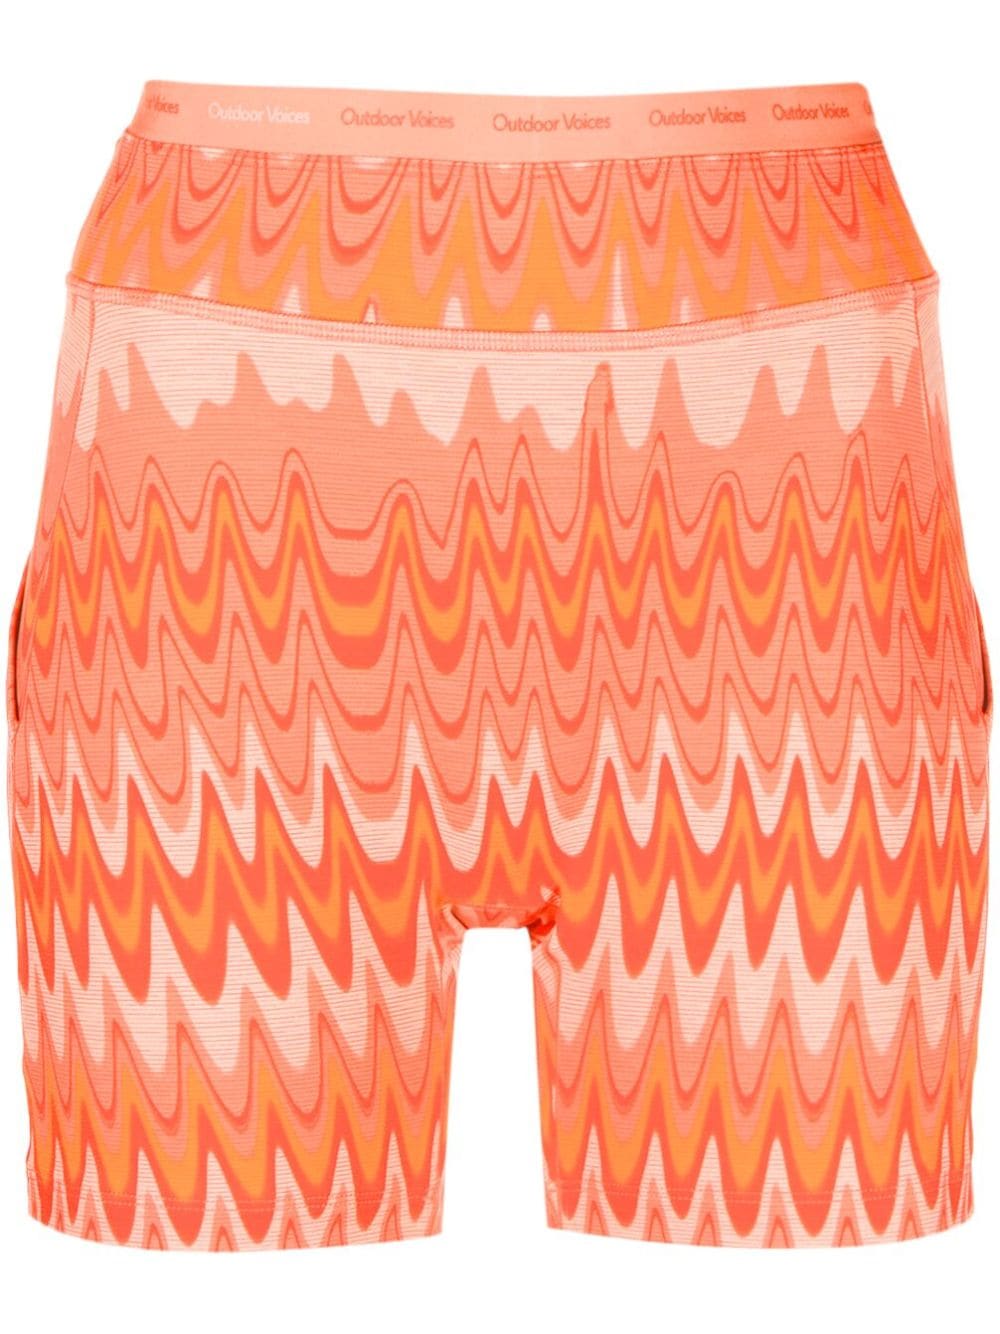 Outdoor Voices Orange Thrive 5-inch Printed Shorts